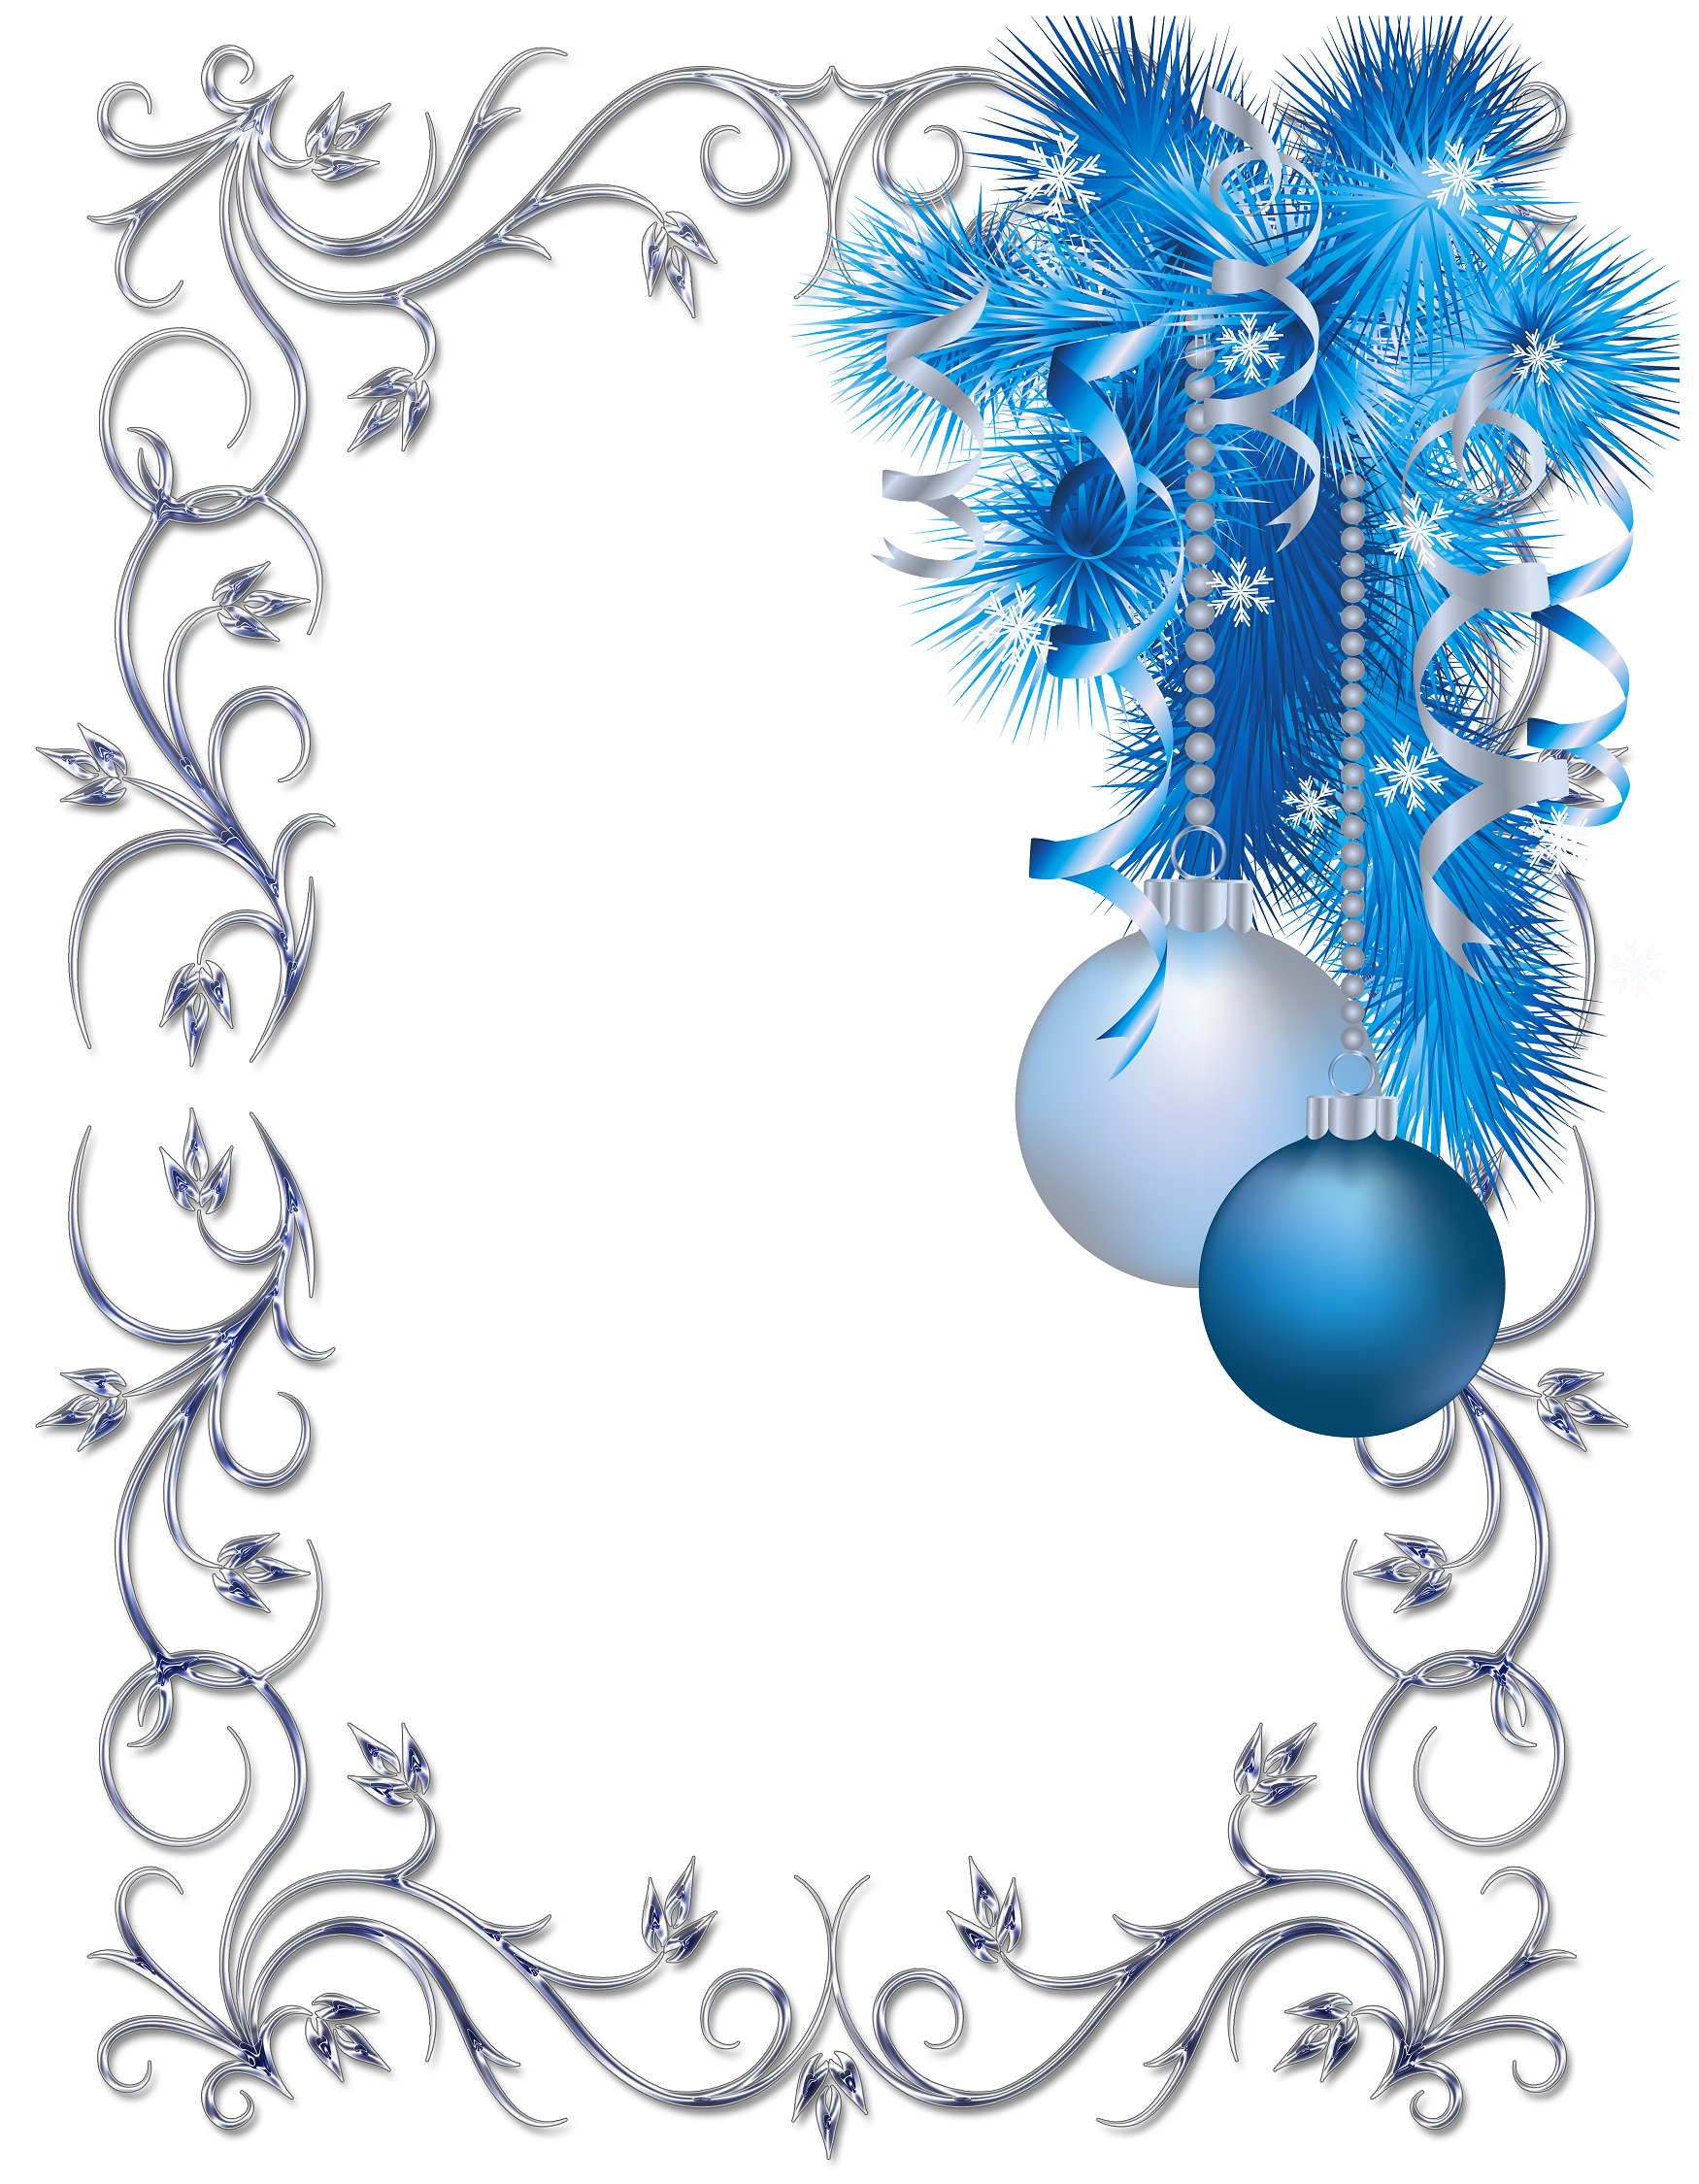 Silver and blue ornament Christmas frame.